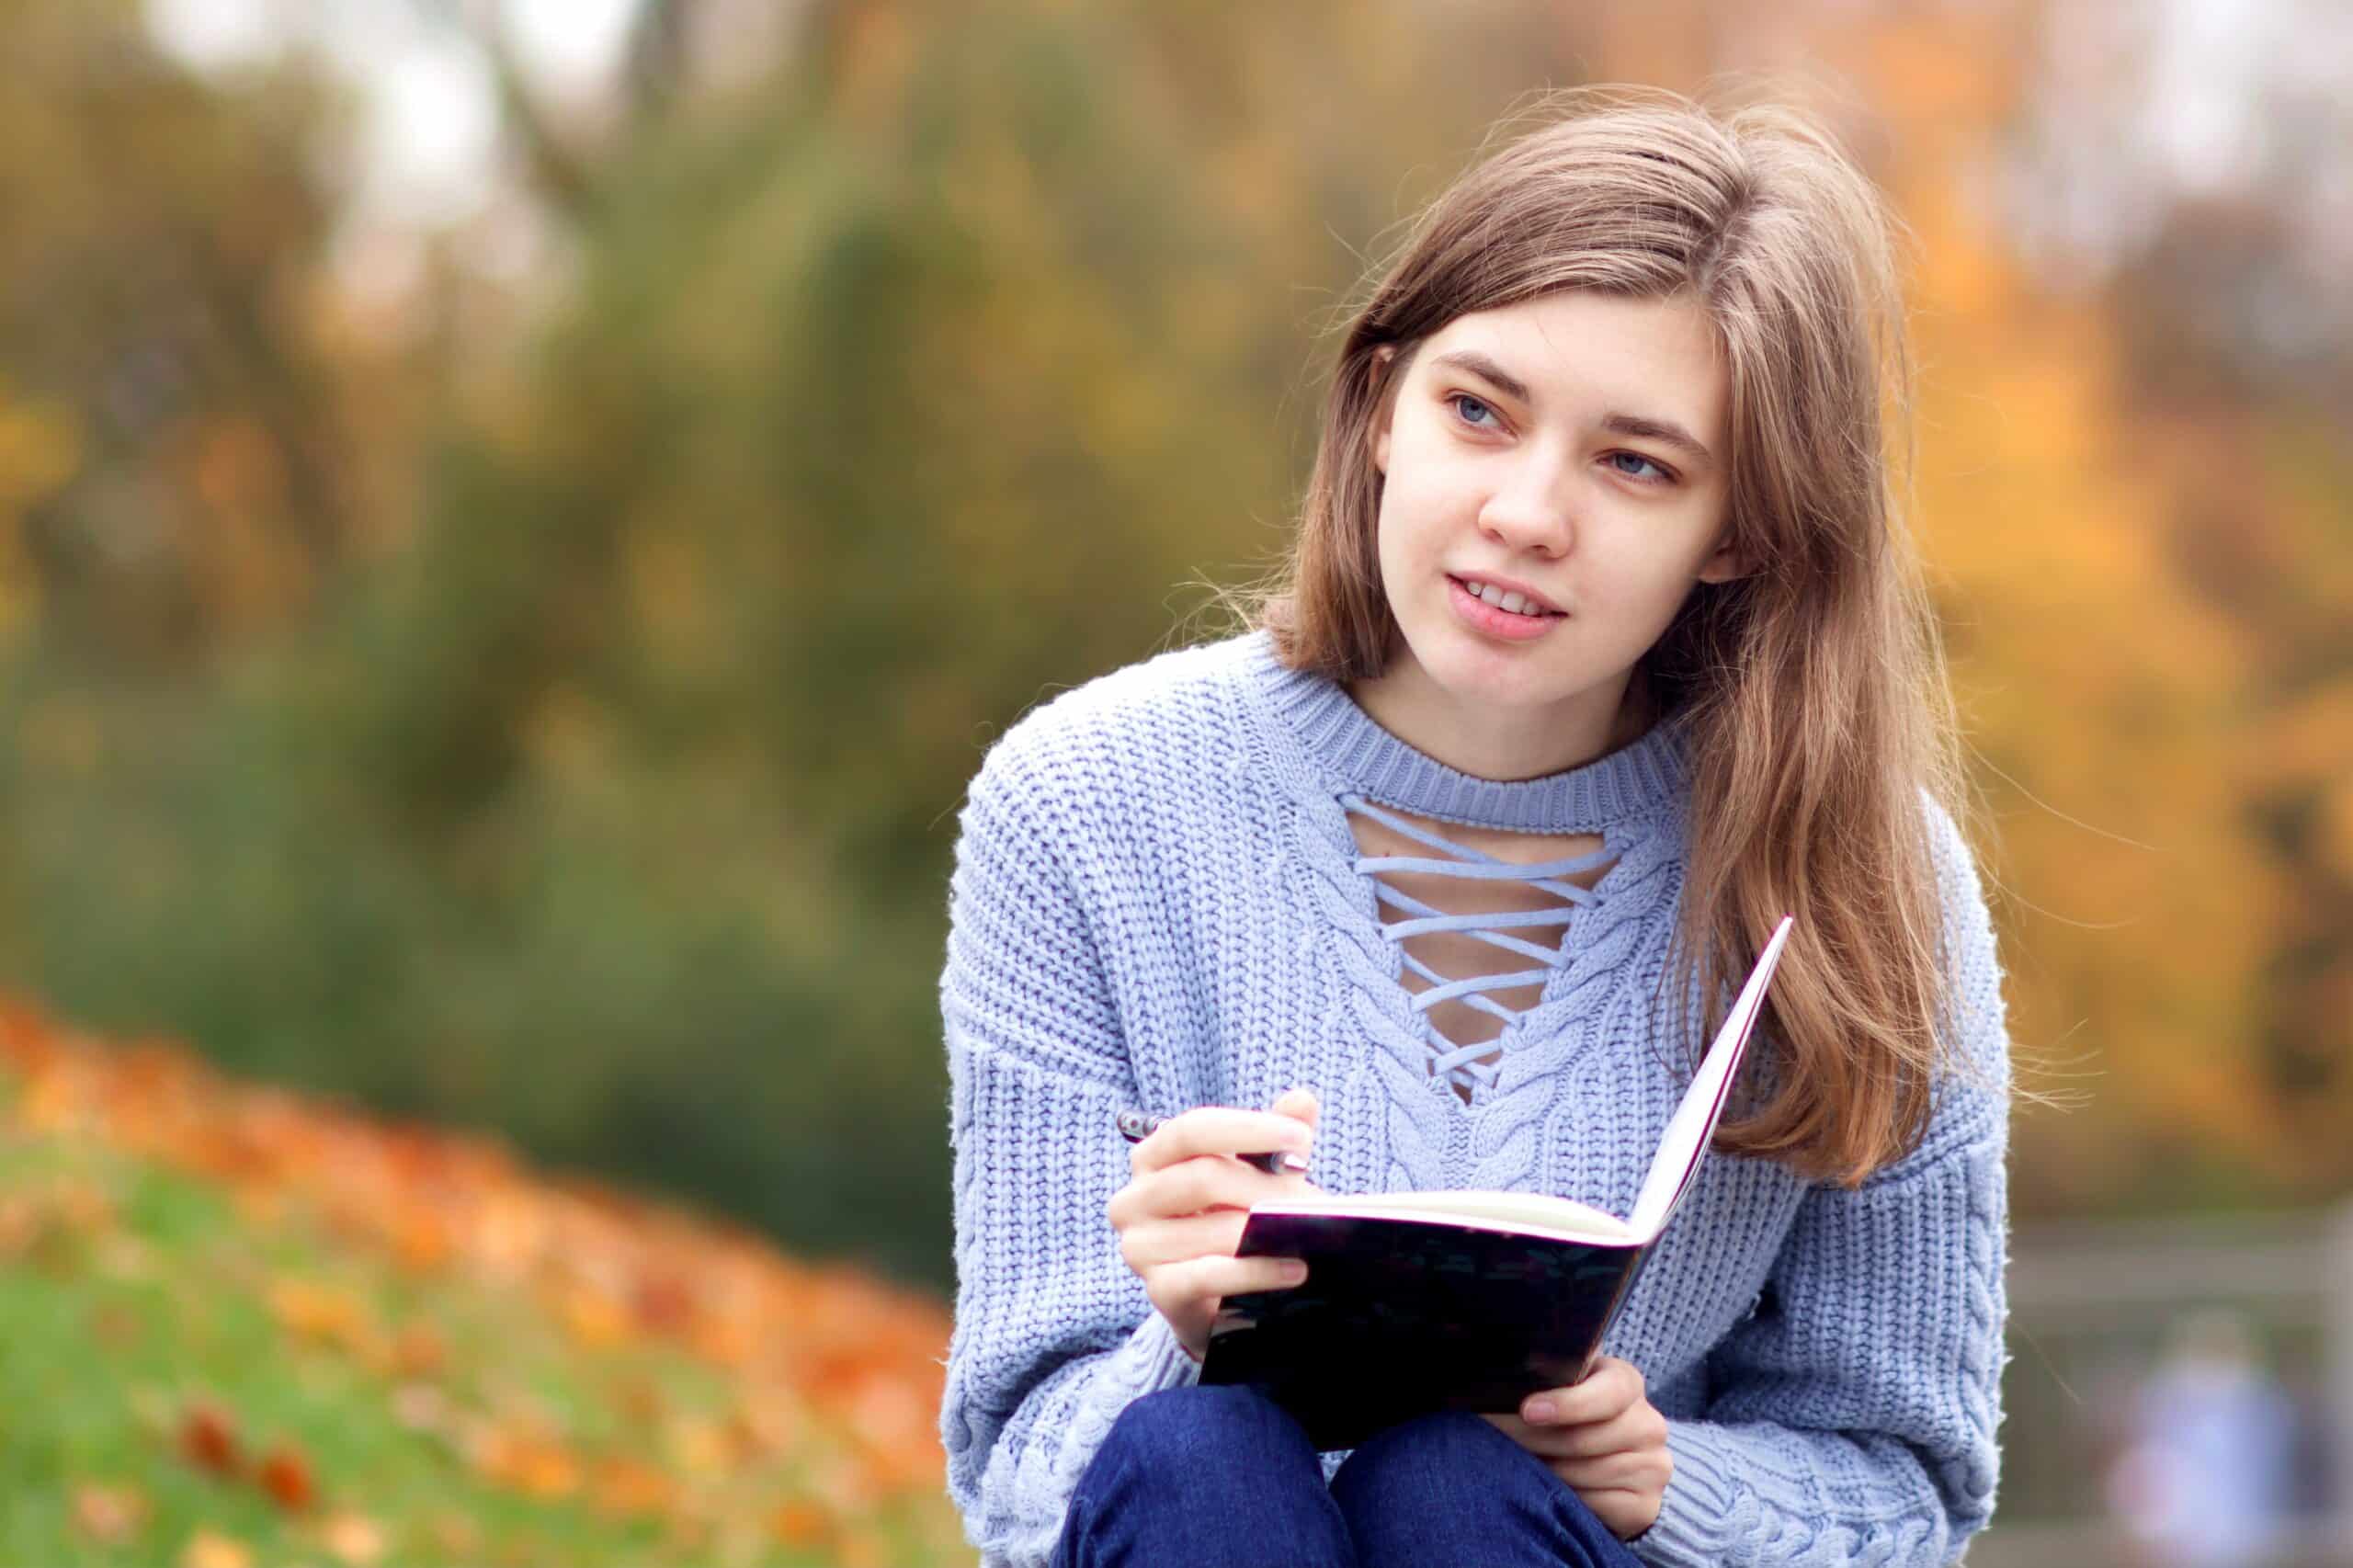 Young beautiful woman writing outdoors in golden autumn park.